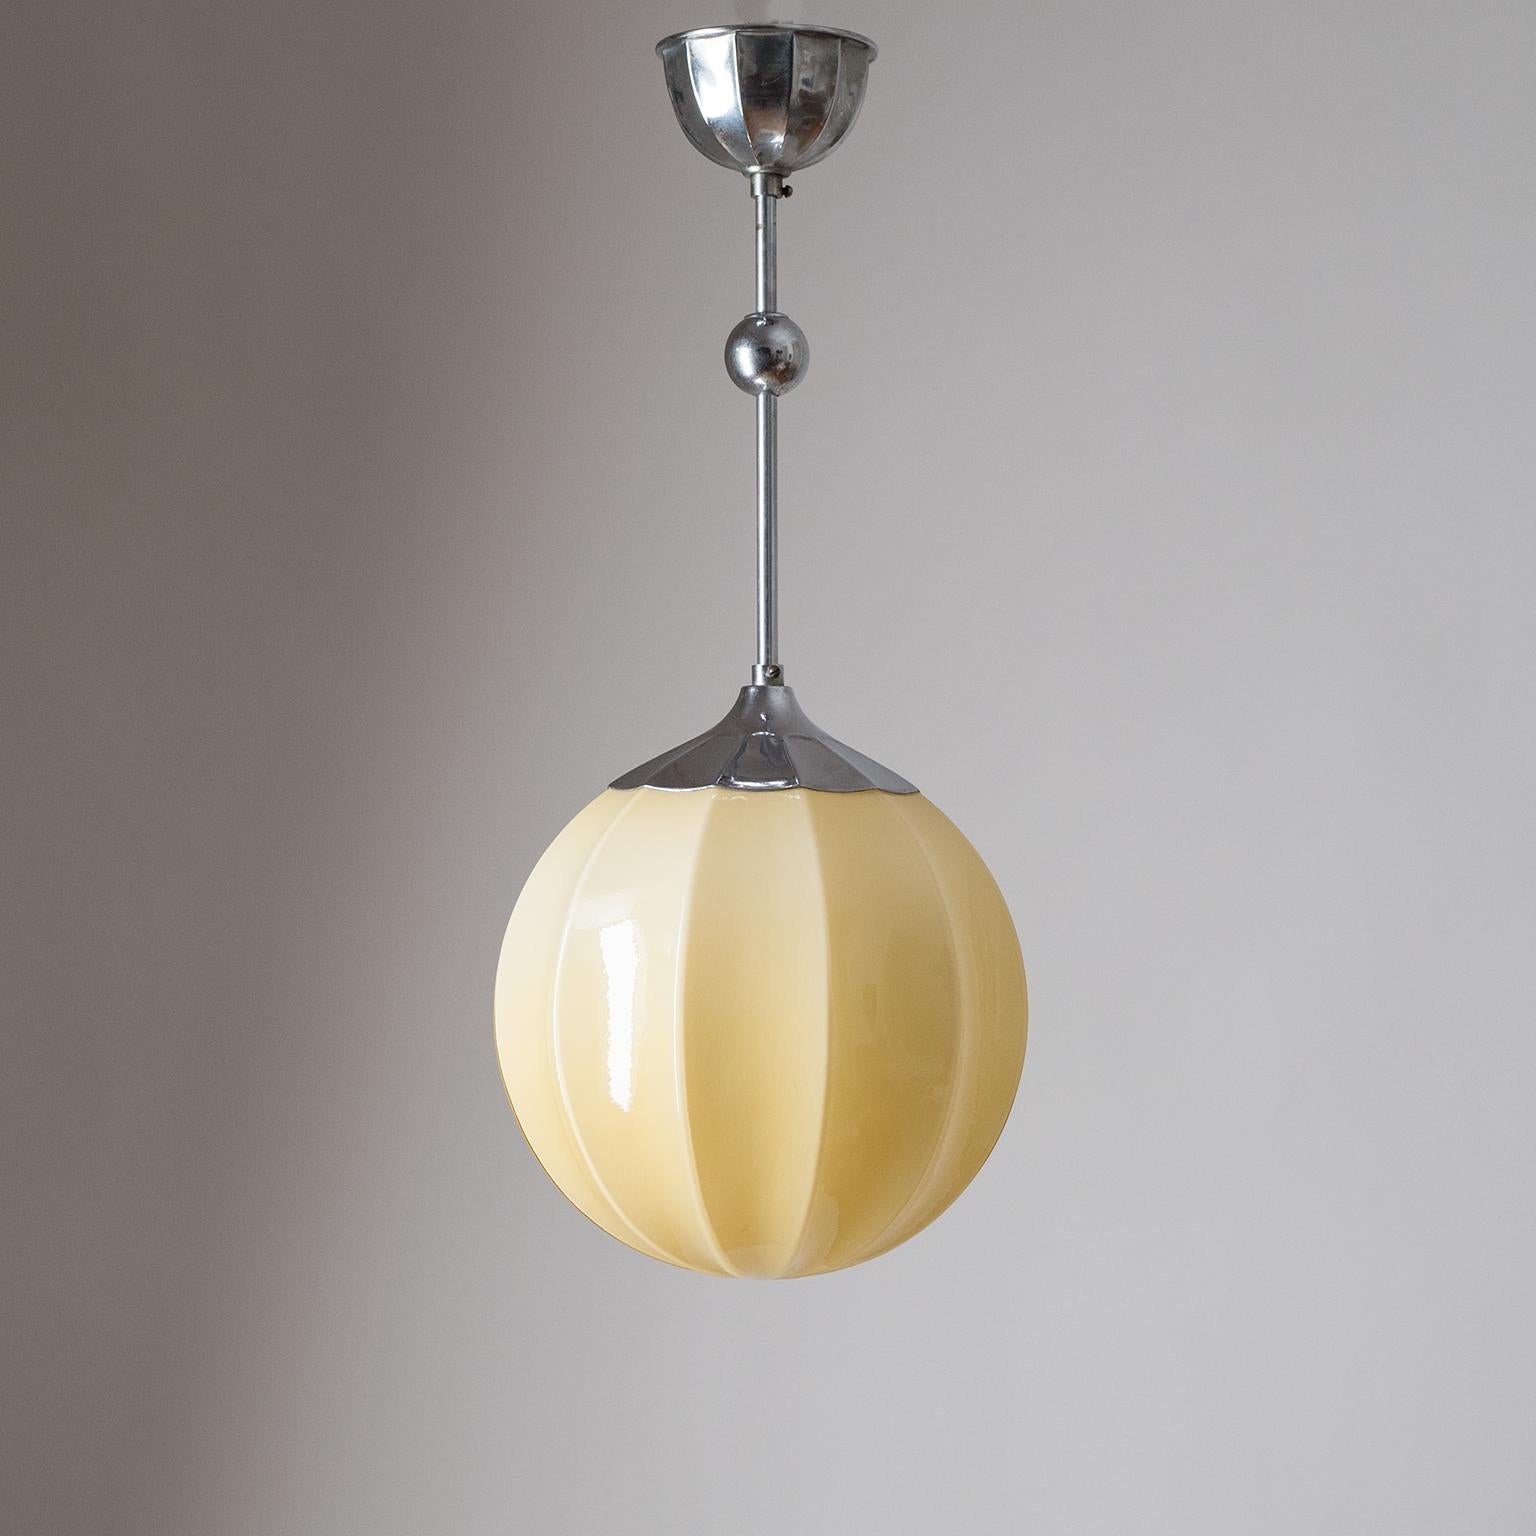 Fine Art Deco ceiling light, Germany, circa 1930. Sand-colored and balloon-shaped glass diffuser with chrome hardware. One original nickel and ceramic E27 socket with new wiring.